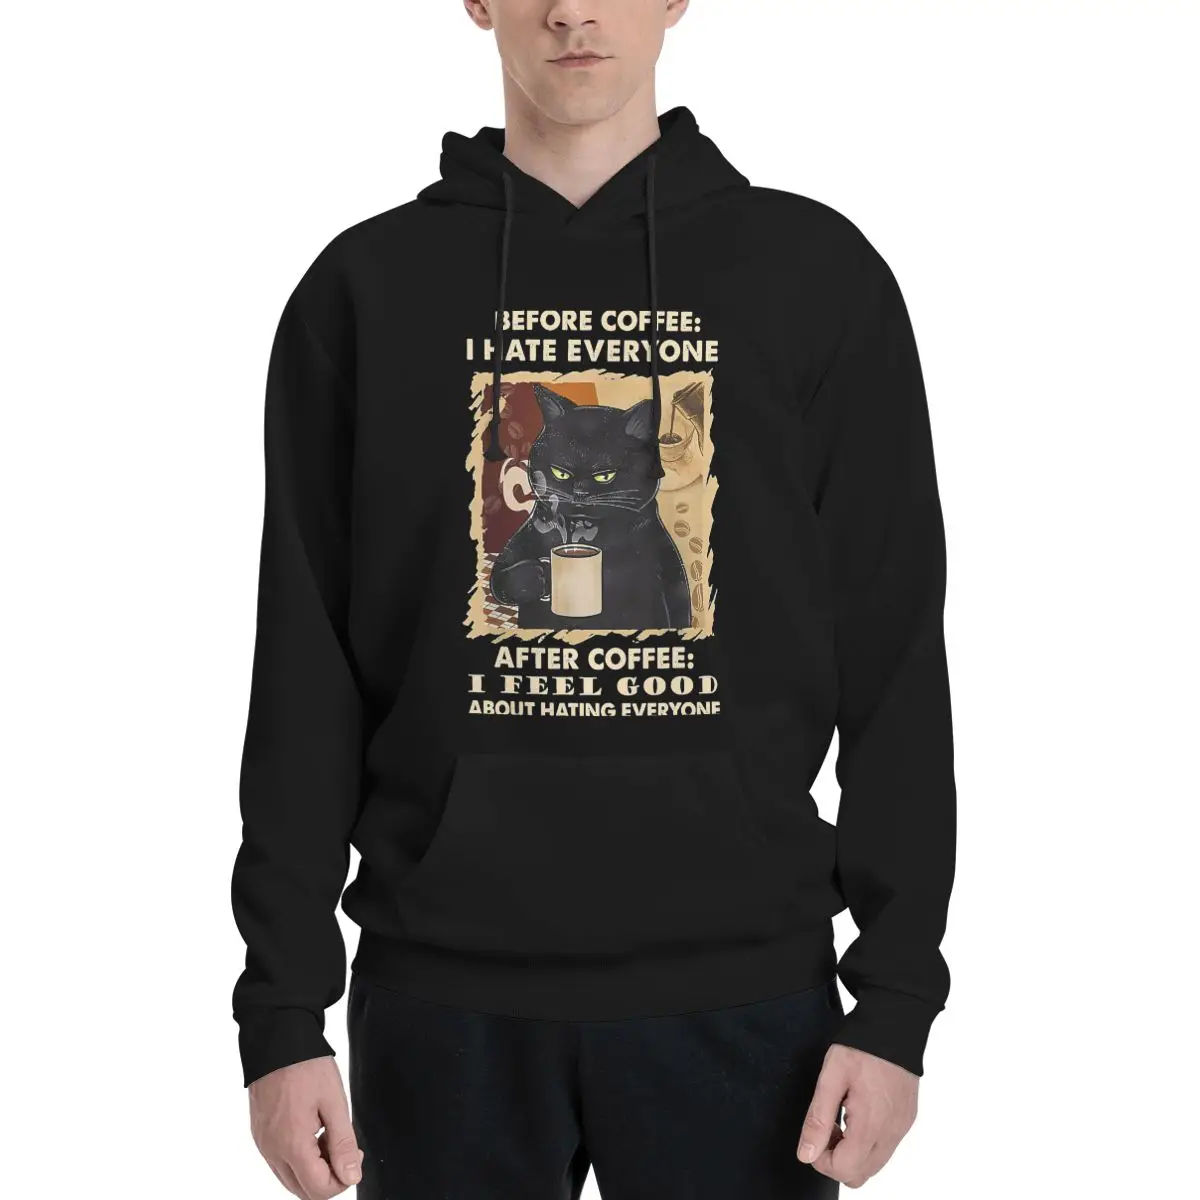 

New Limited Coffee Black Cat Drink Cool Design Great Polyester Hoodie Men's sweatershirt Warm Dif Colors Sizes